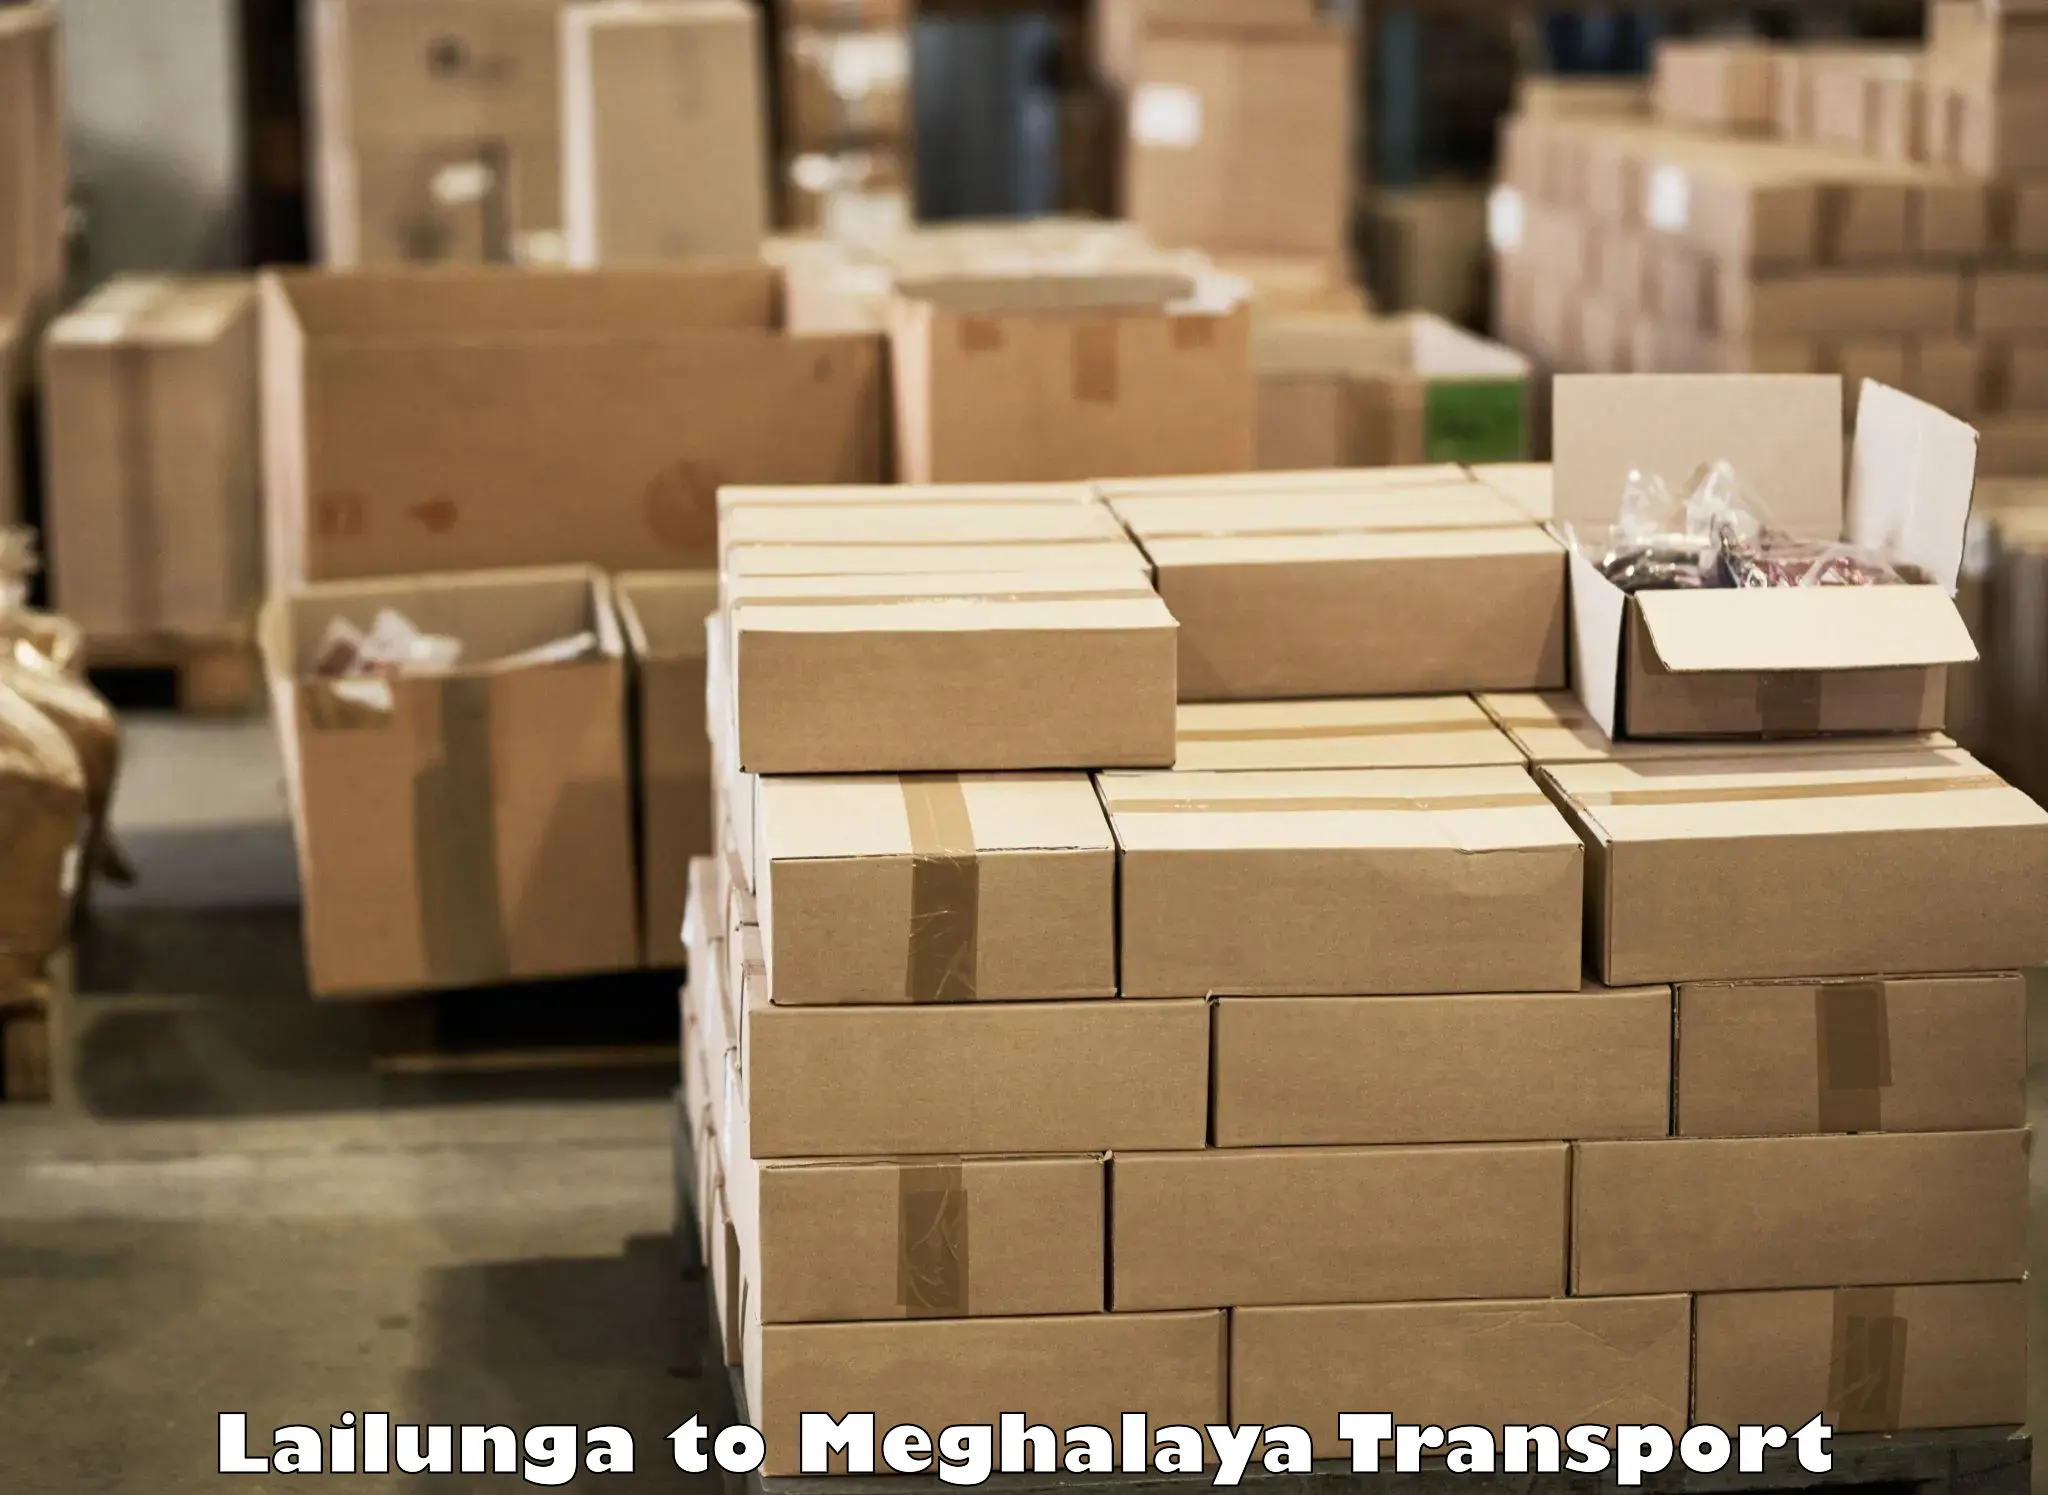 Truck transport companies in India Lailunga to Tura